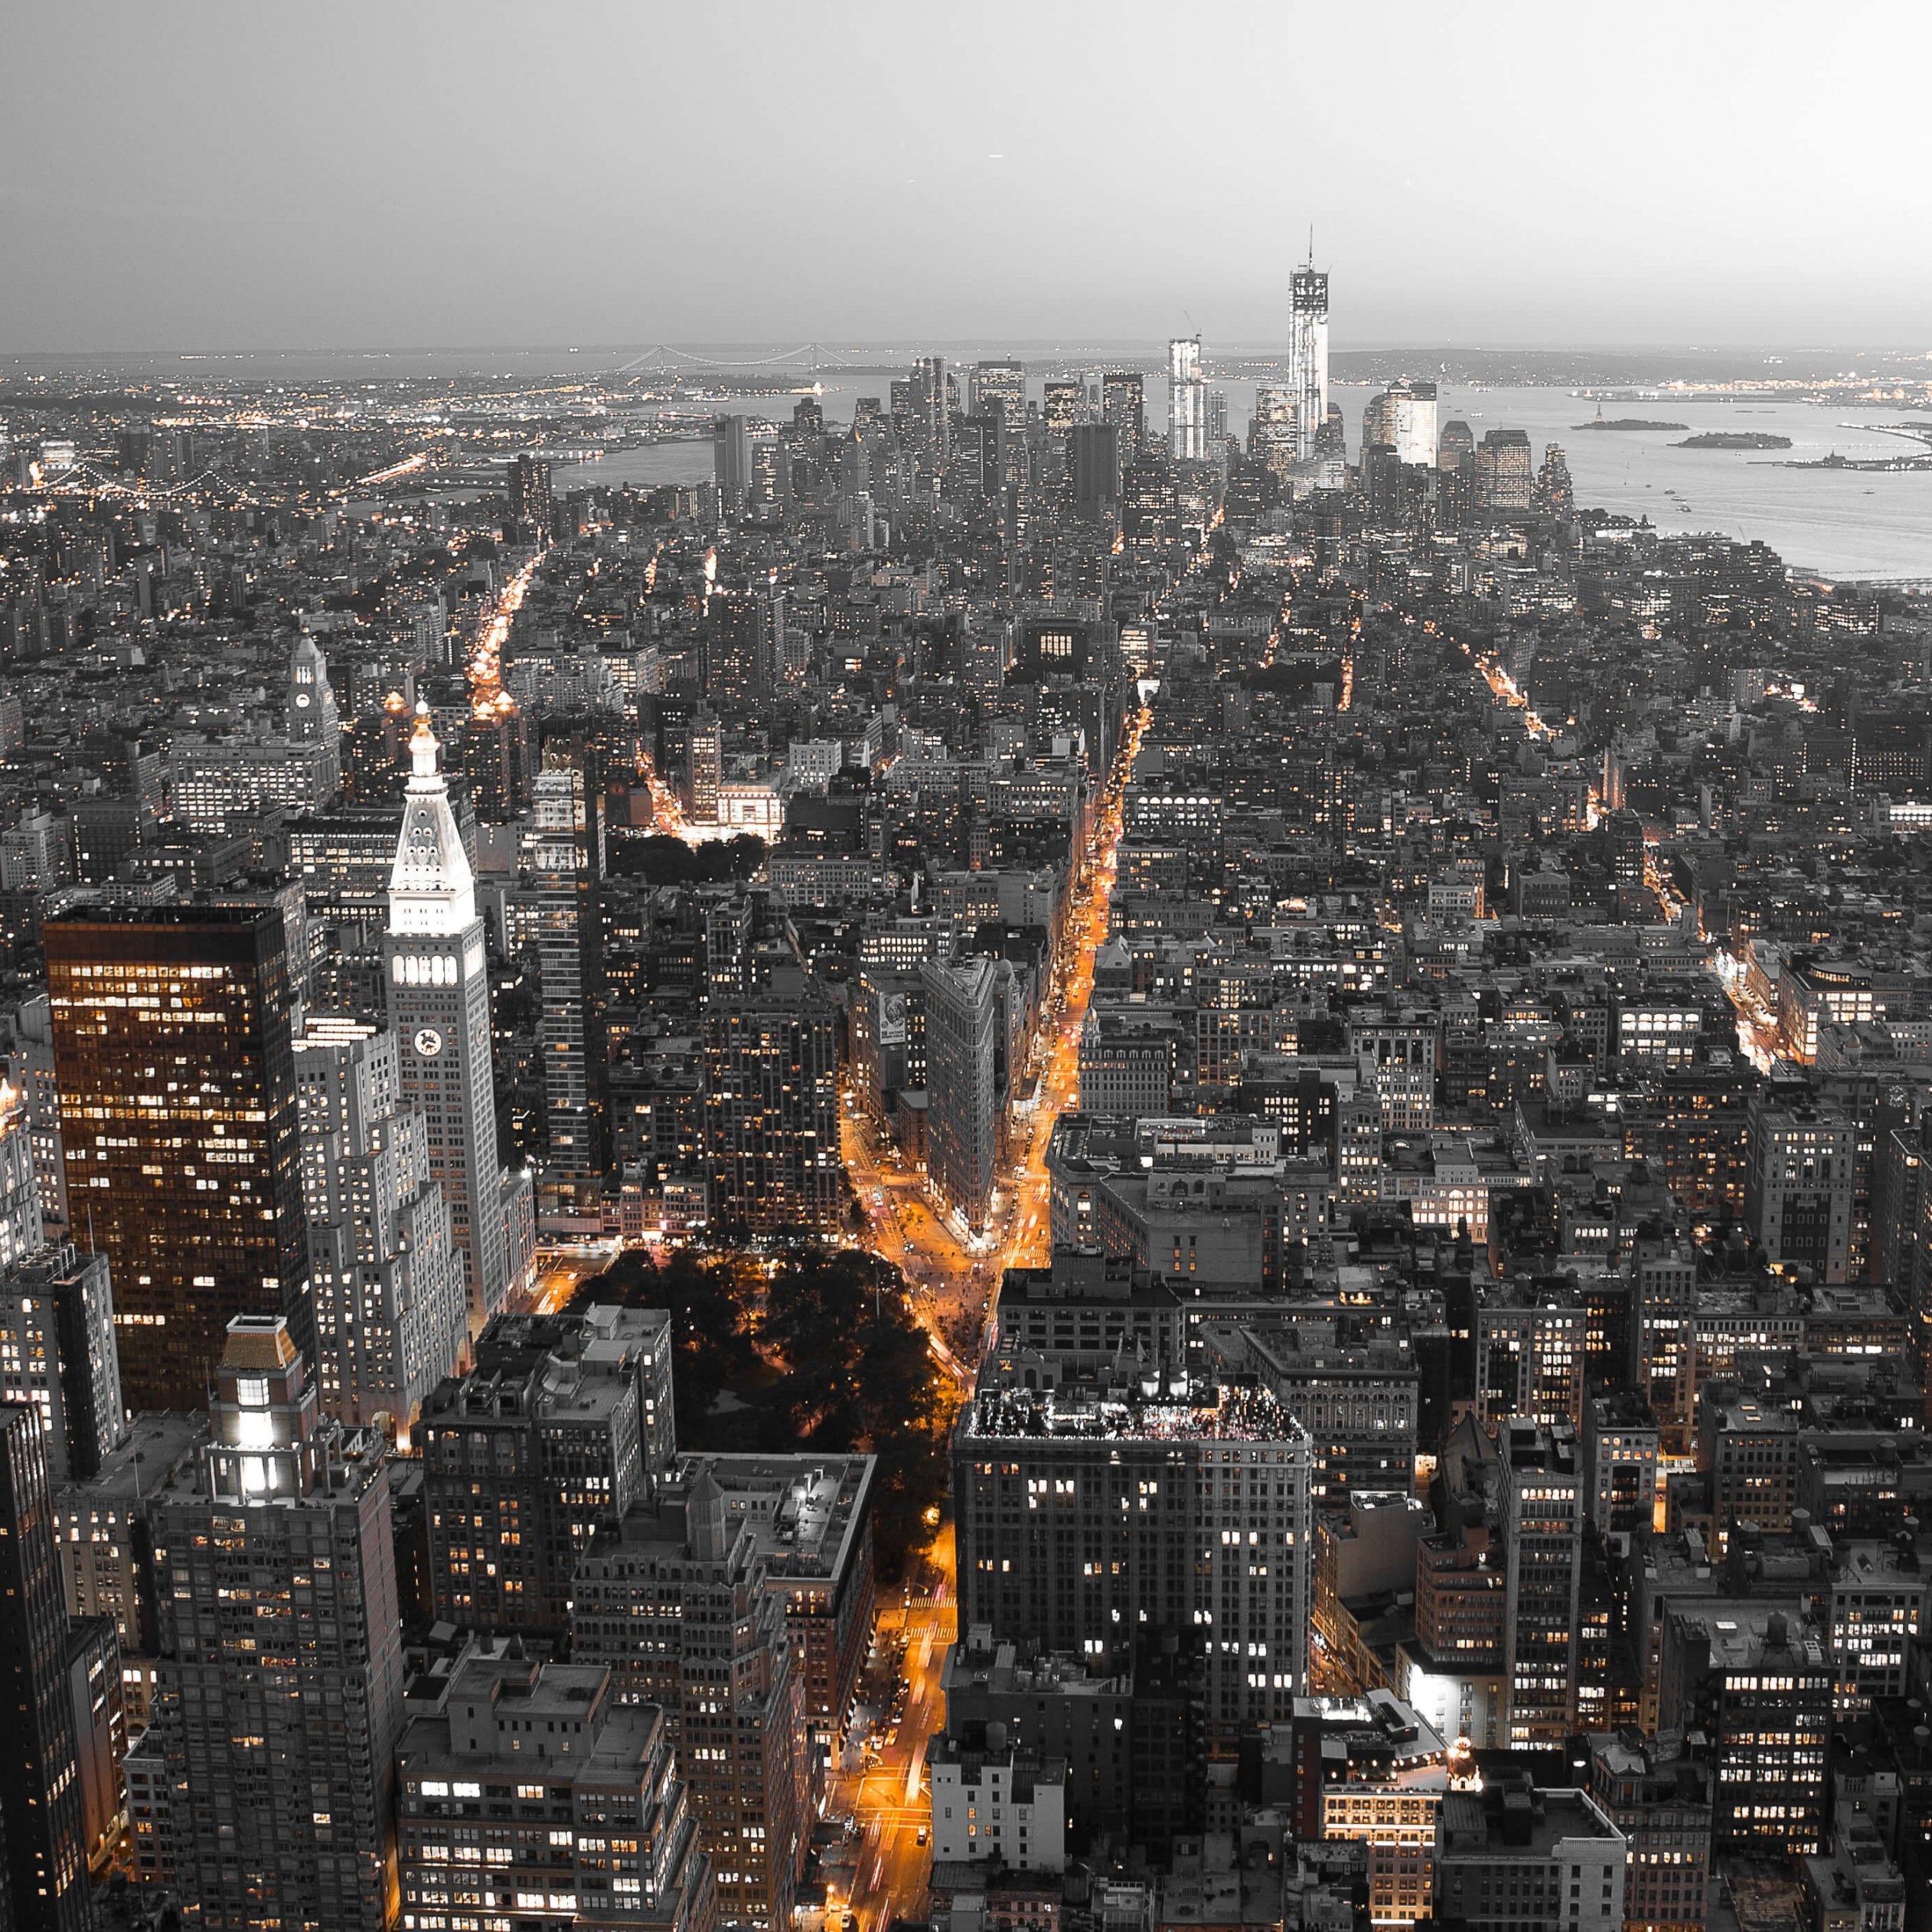 New York City by Night Wallpaper for Apple iPad 4